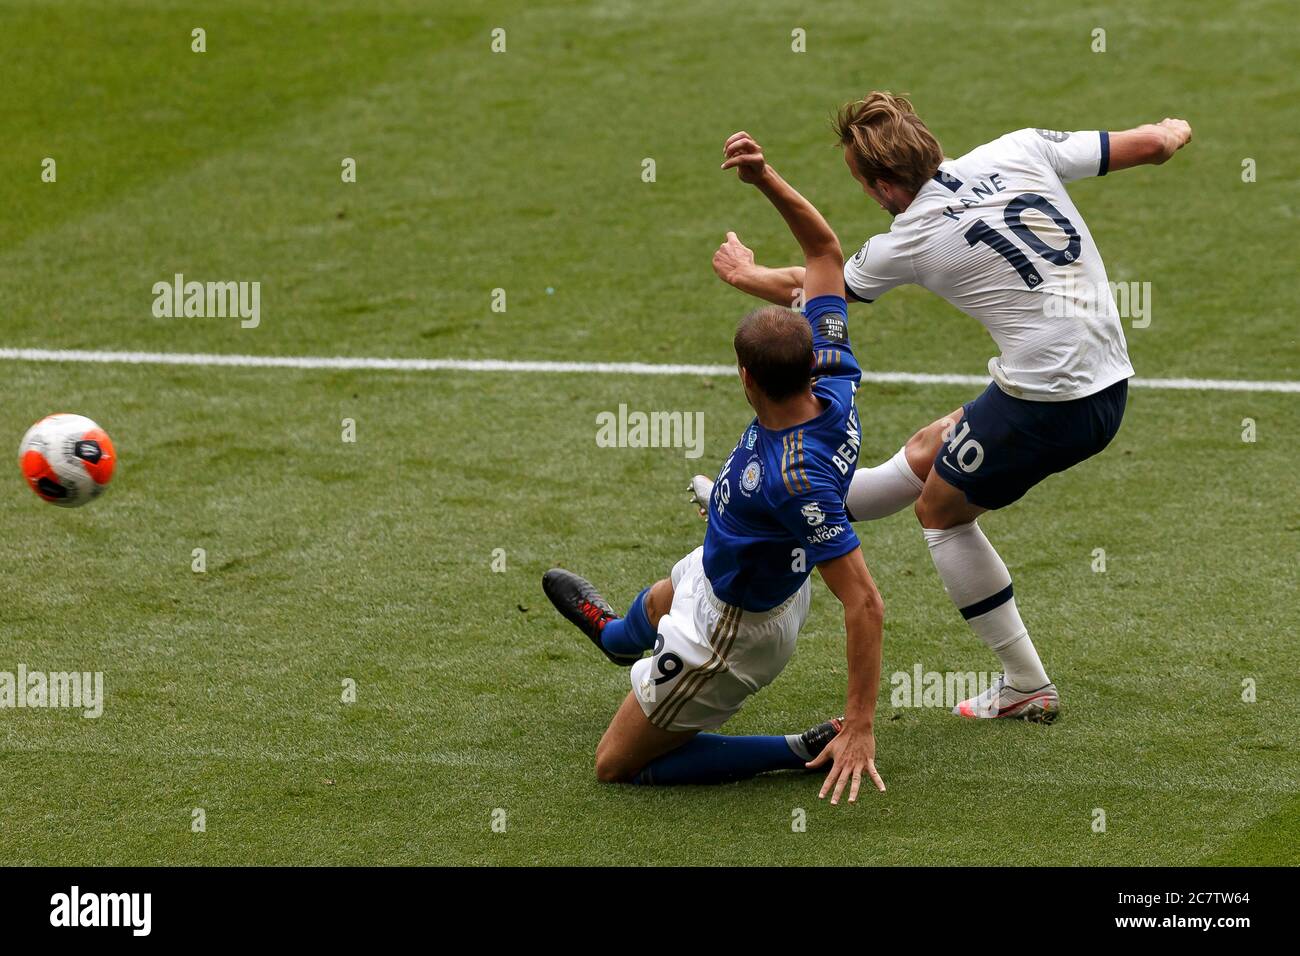 London, UK. 19th July, 2020. Harry Kane of Tottenham Hotspur scores their third goal to make the score 3-0 during the Premier League match between Tottenham Hotspur and Leicester City at the Tottenham Hotspur Stadium on July 19th 2020 in London, England. (Photo by Daniel Chesterton/phcimages.com) Credit: PHC Images/Alamy Live News Stock Photo